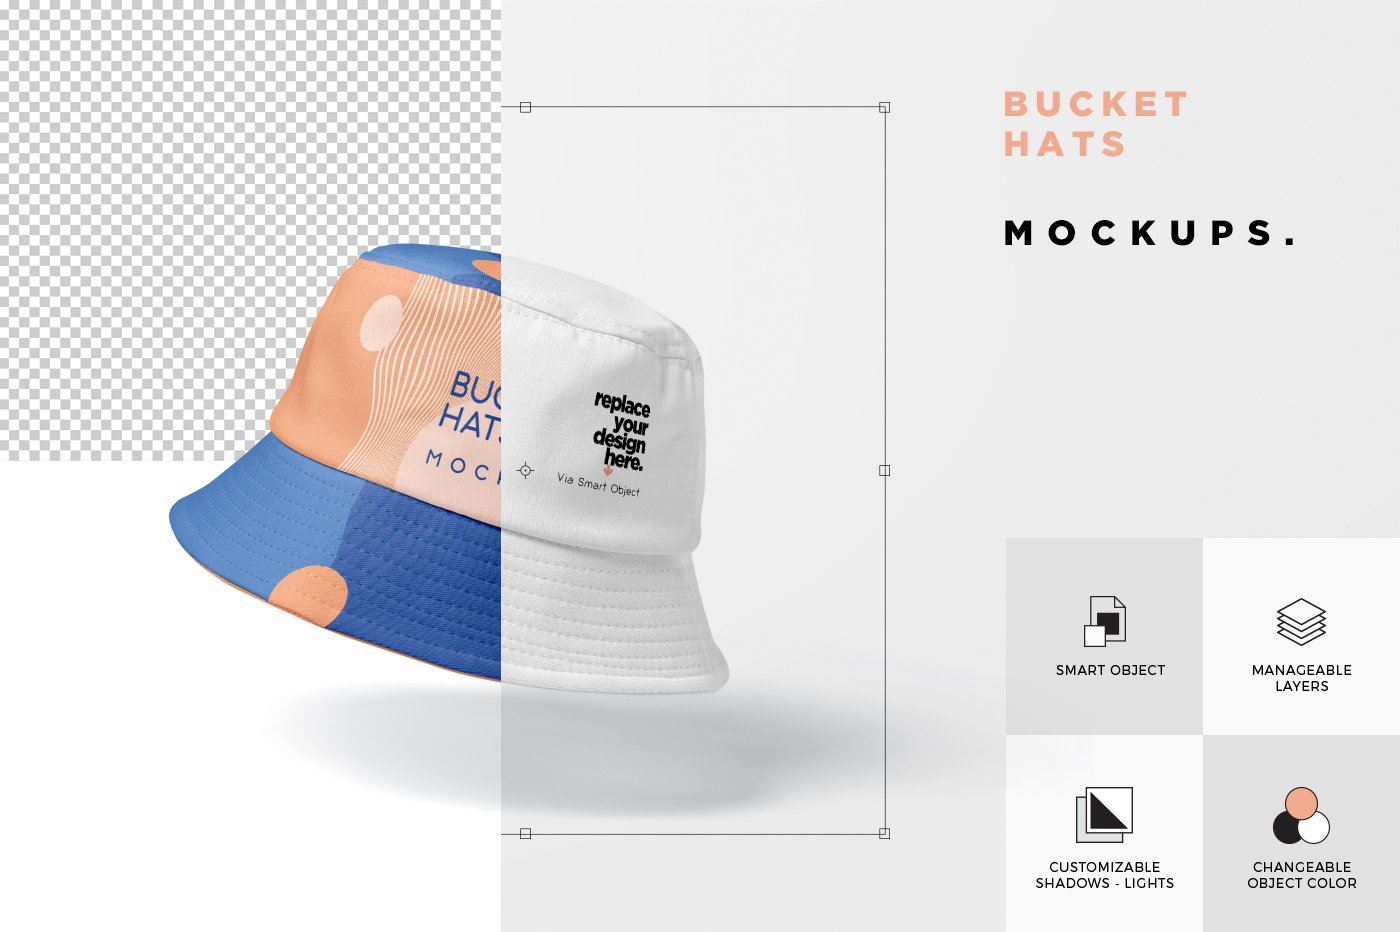 mockup features image 111 1